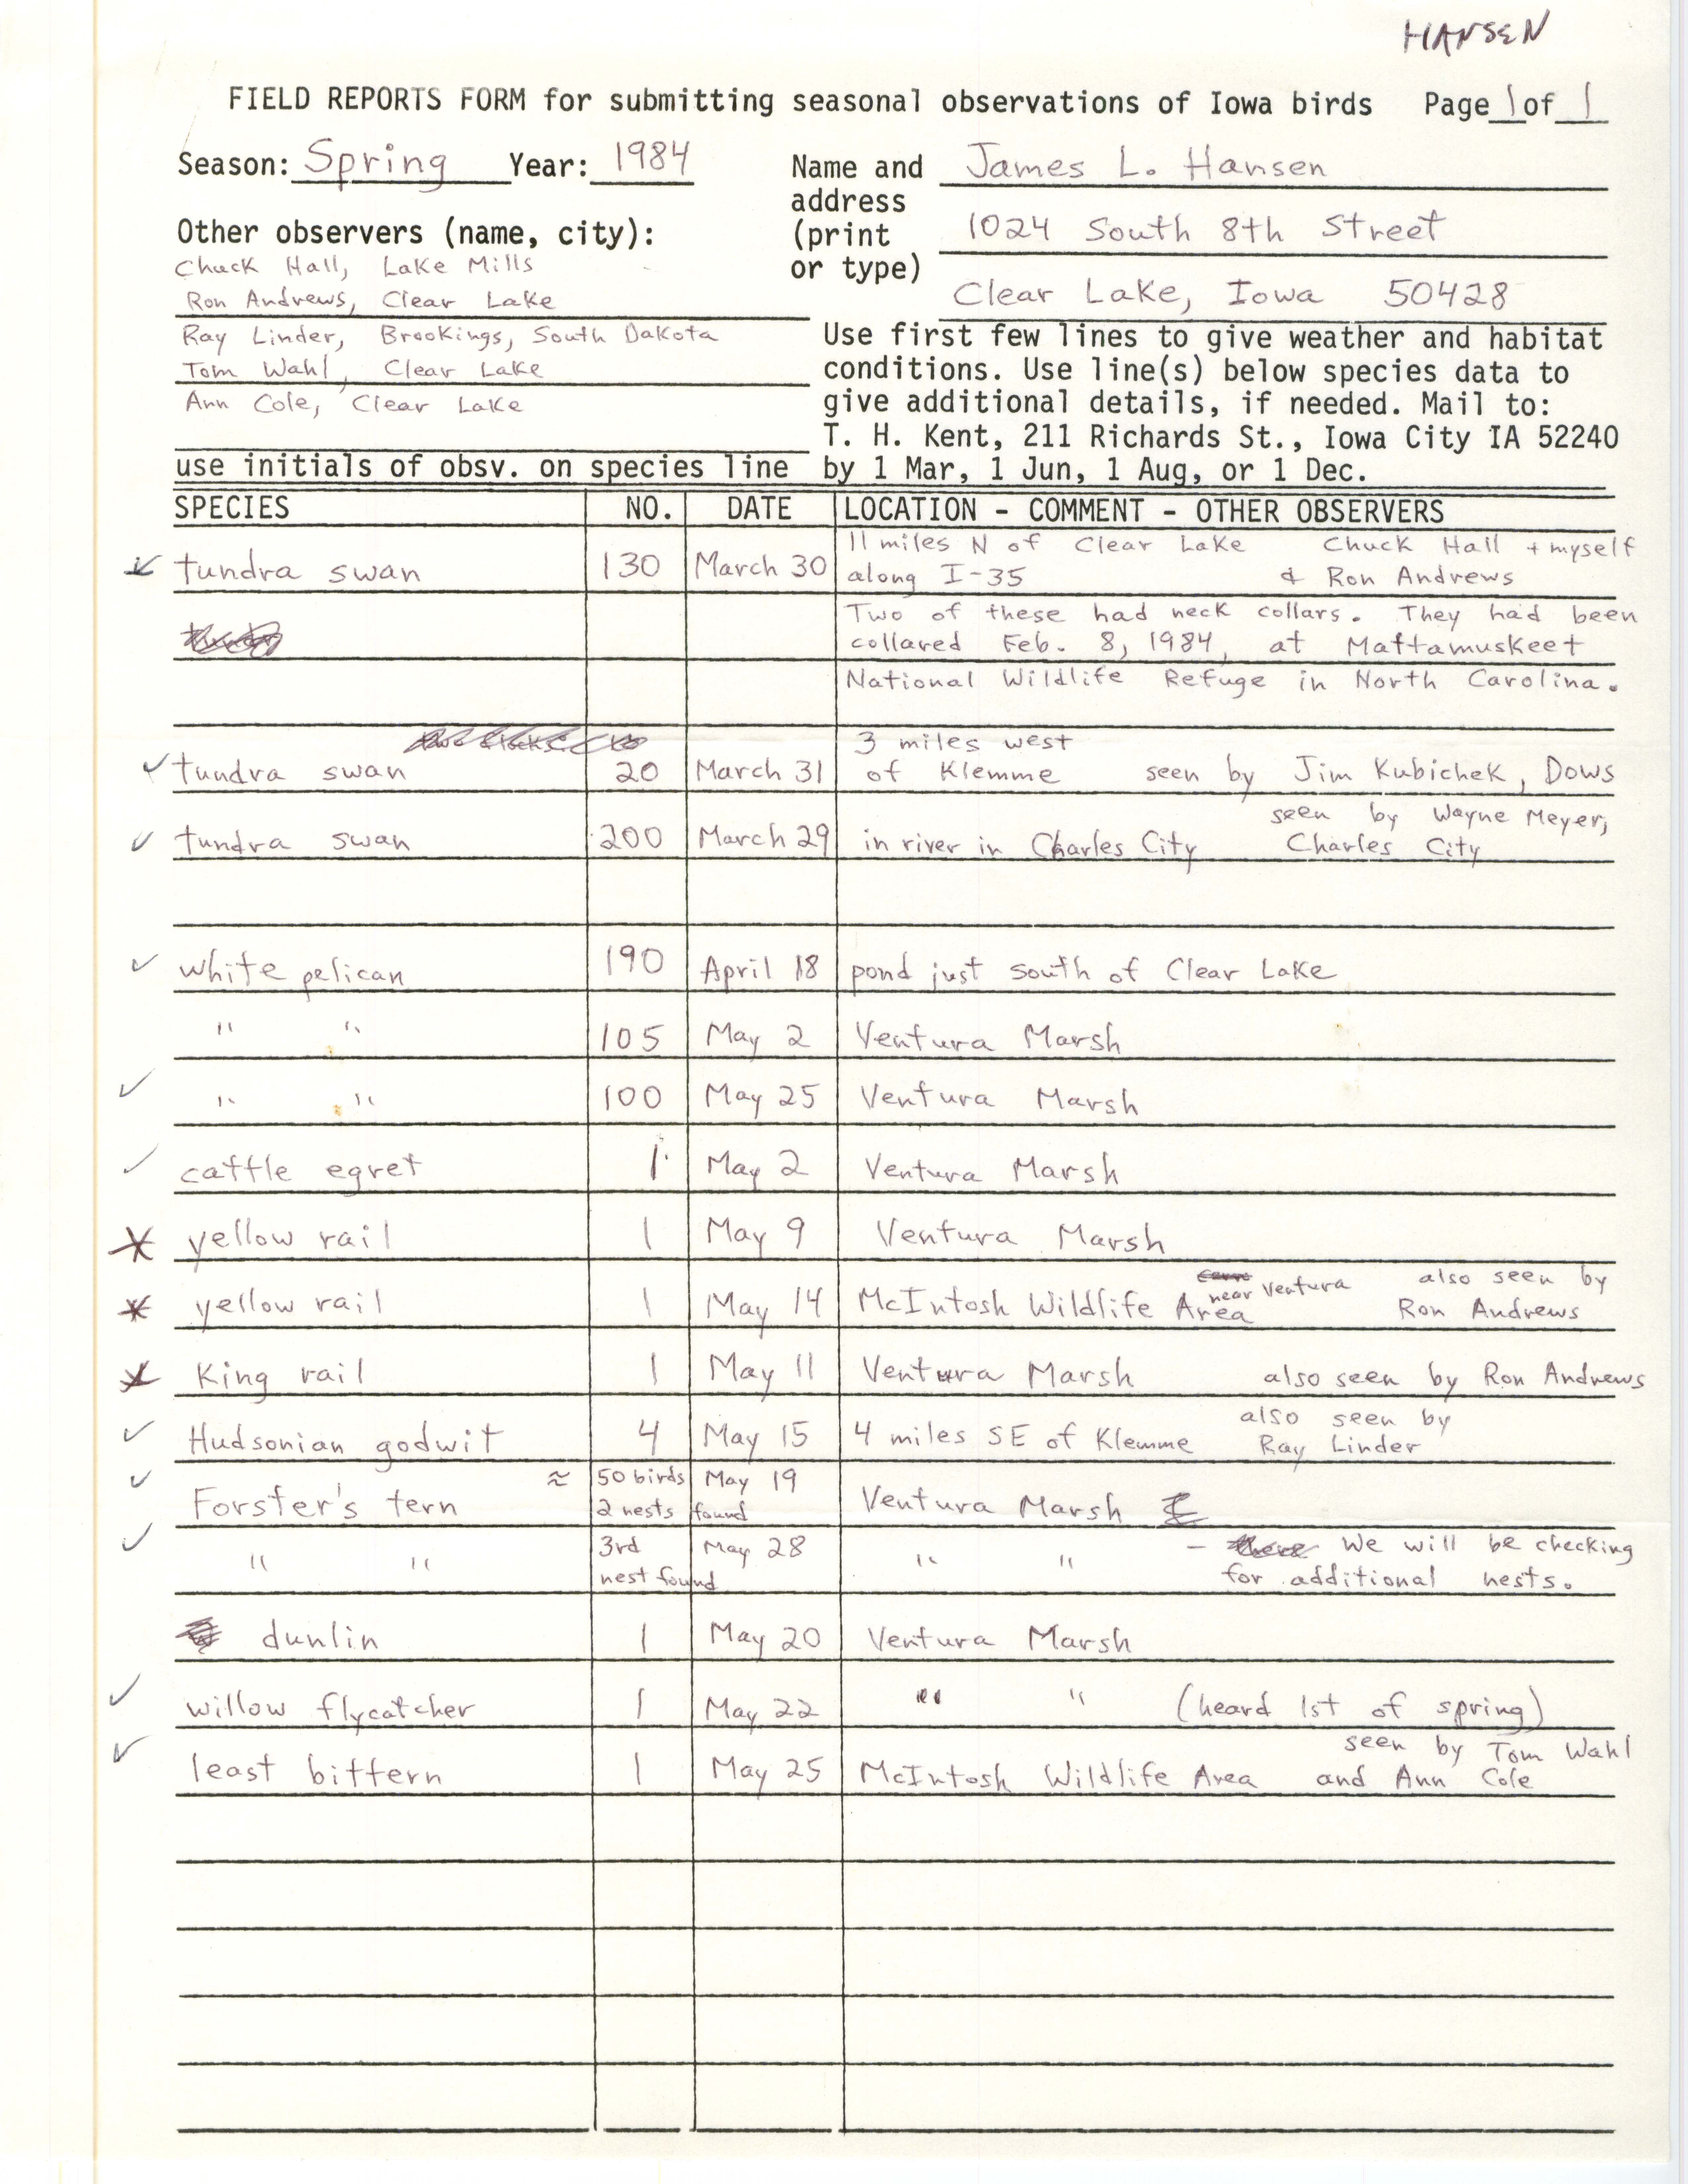 Field notes contributed by James L. Hansen, Clear Lake, Iowa, spring 1984